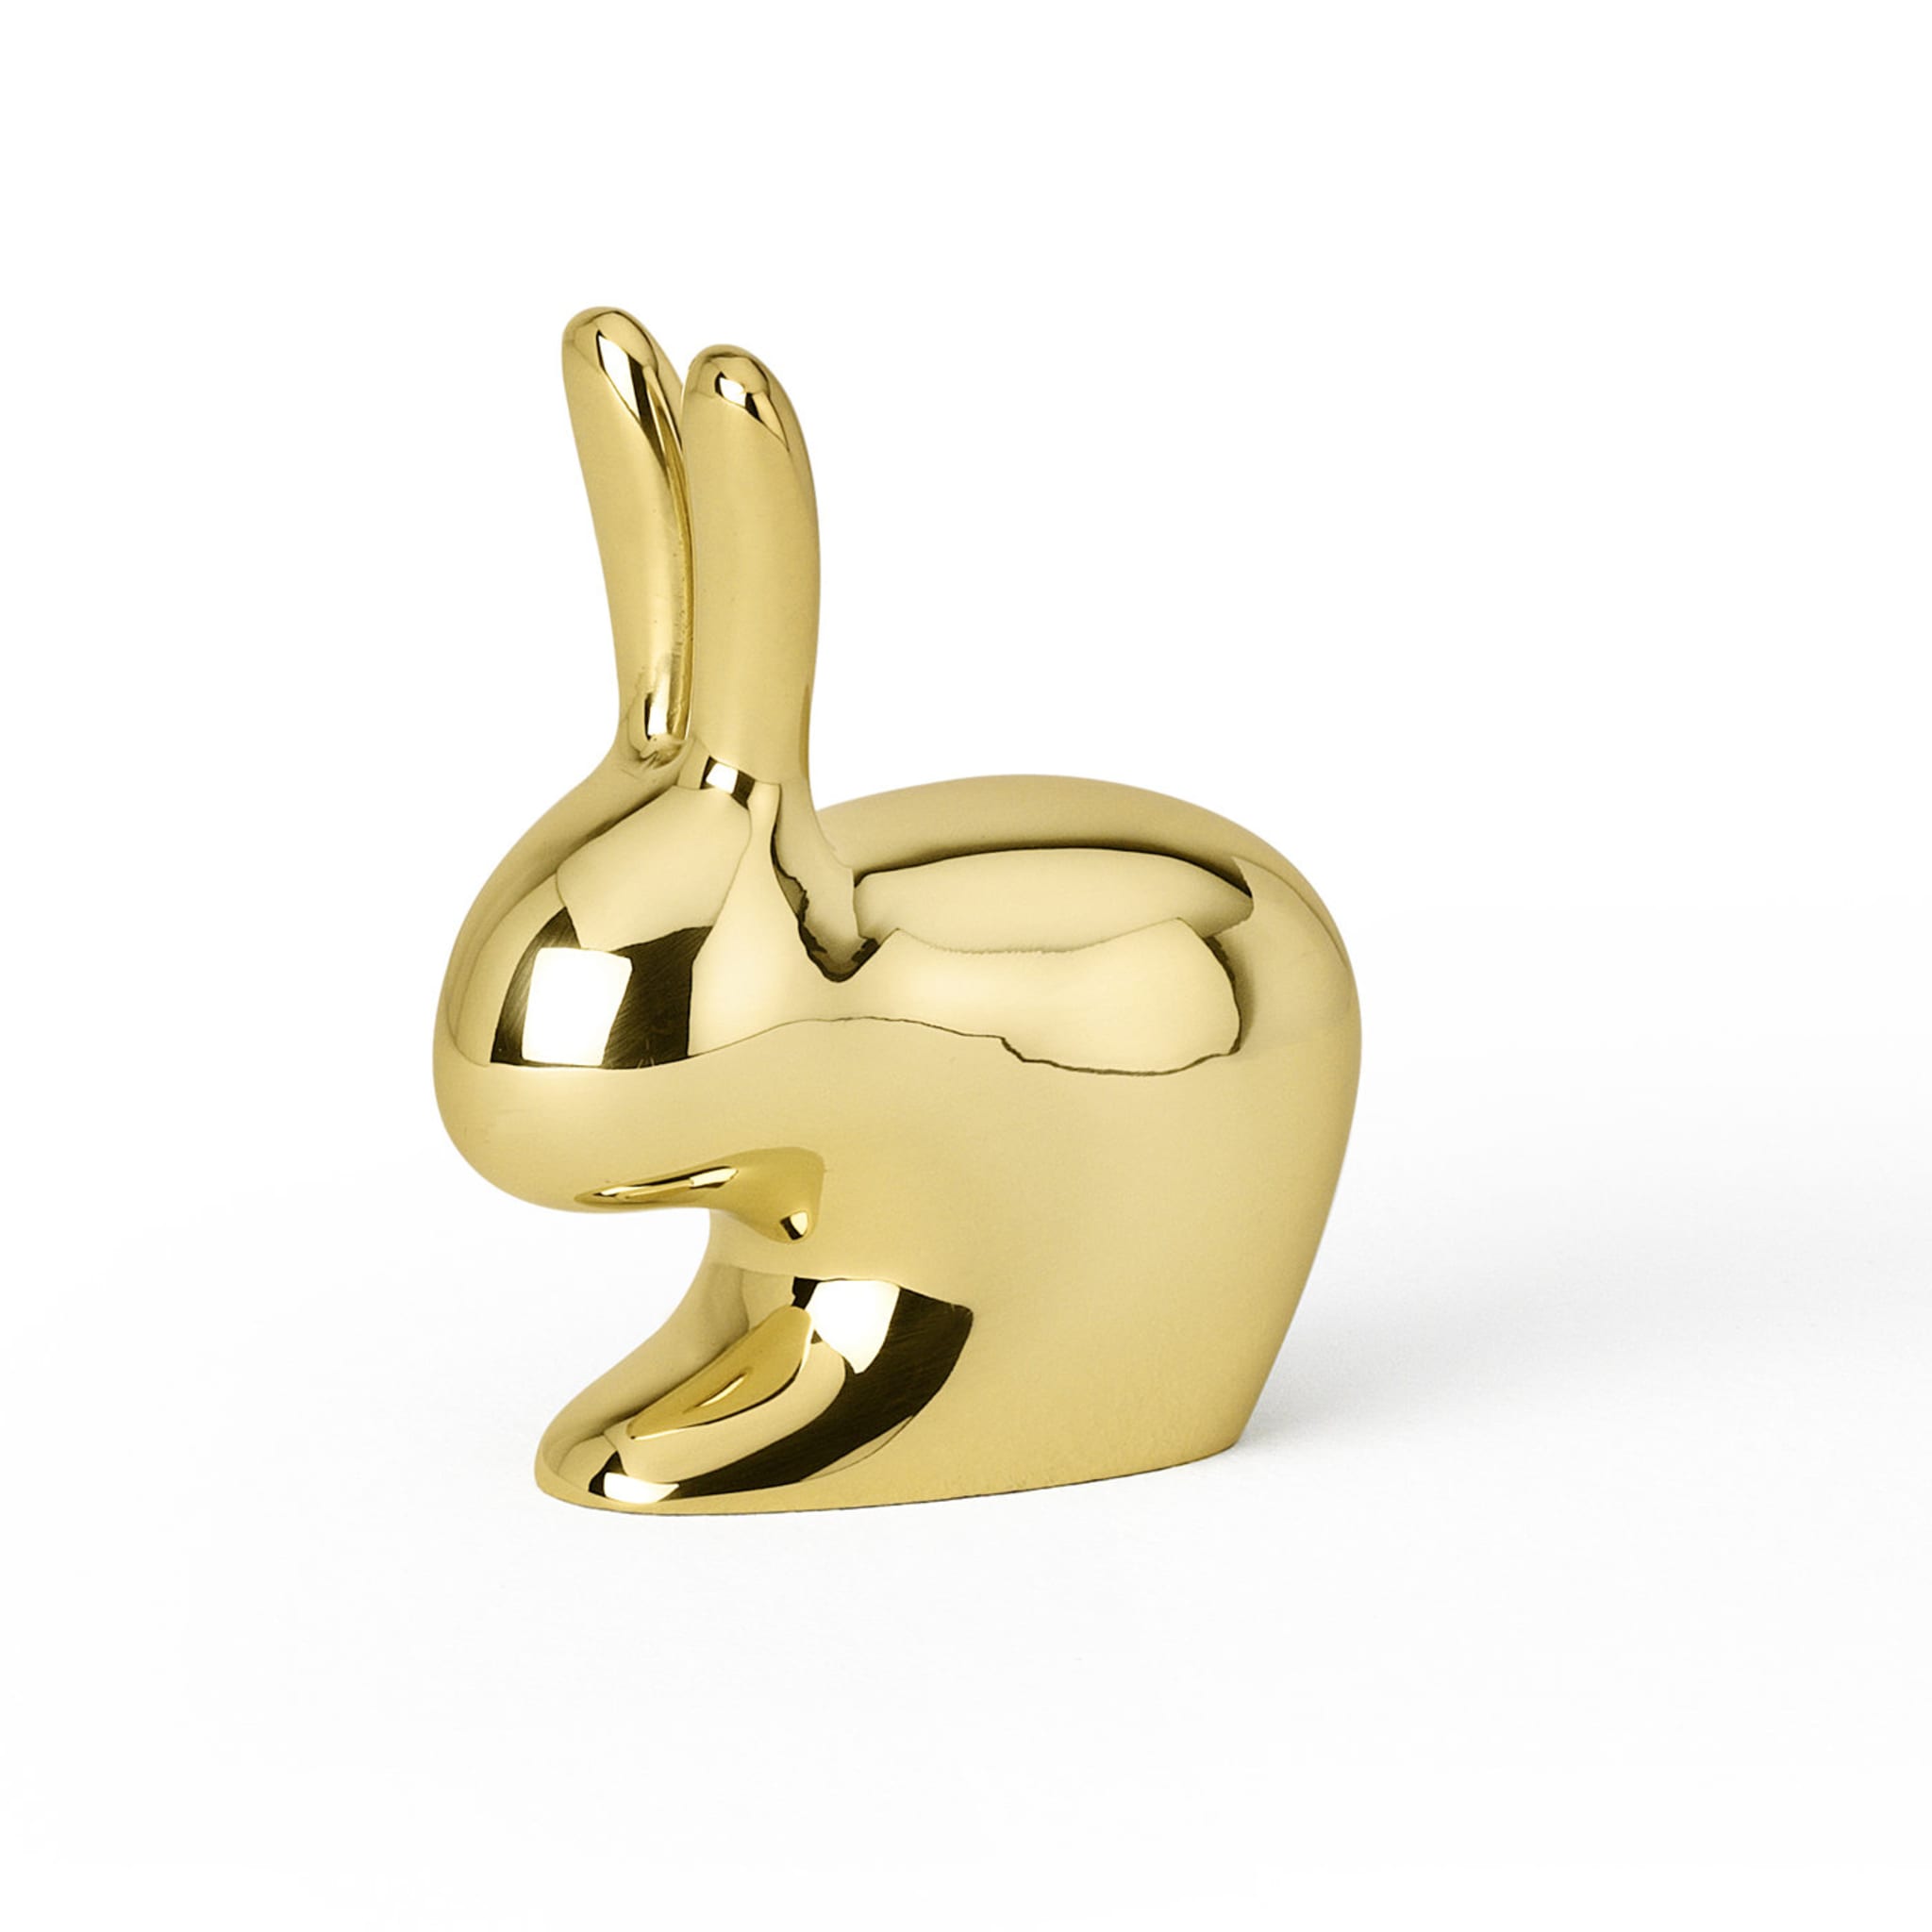 Rabbit Doorstop in Polished Brass by Stefano Giovannoni - Alternative view 3